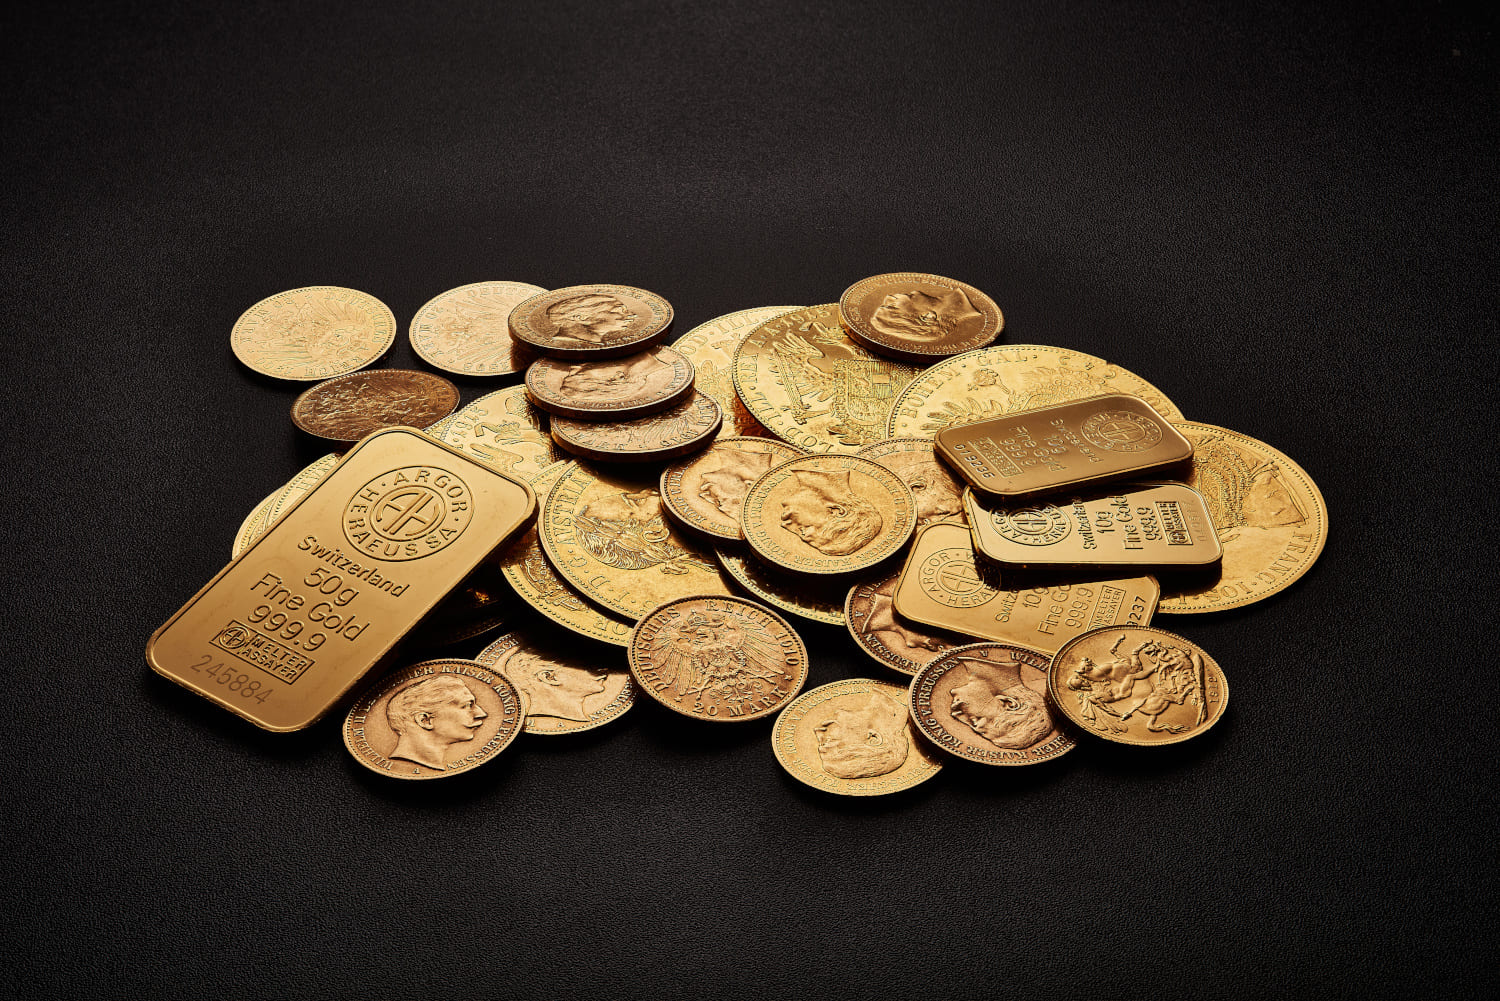 Gold bars and gold coins on a black background